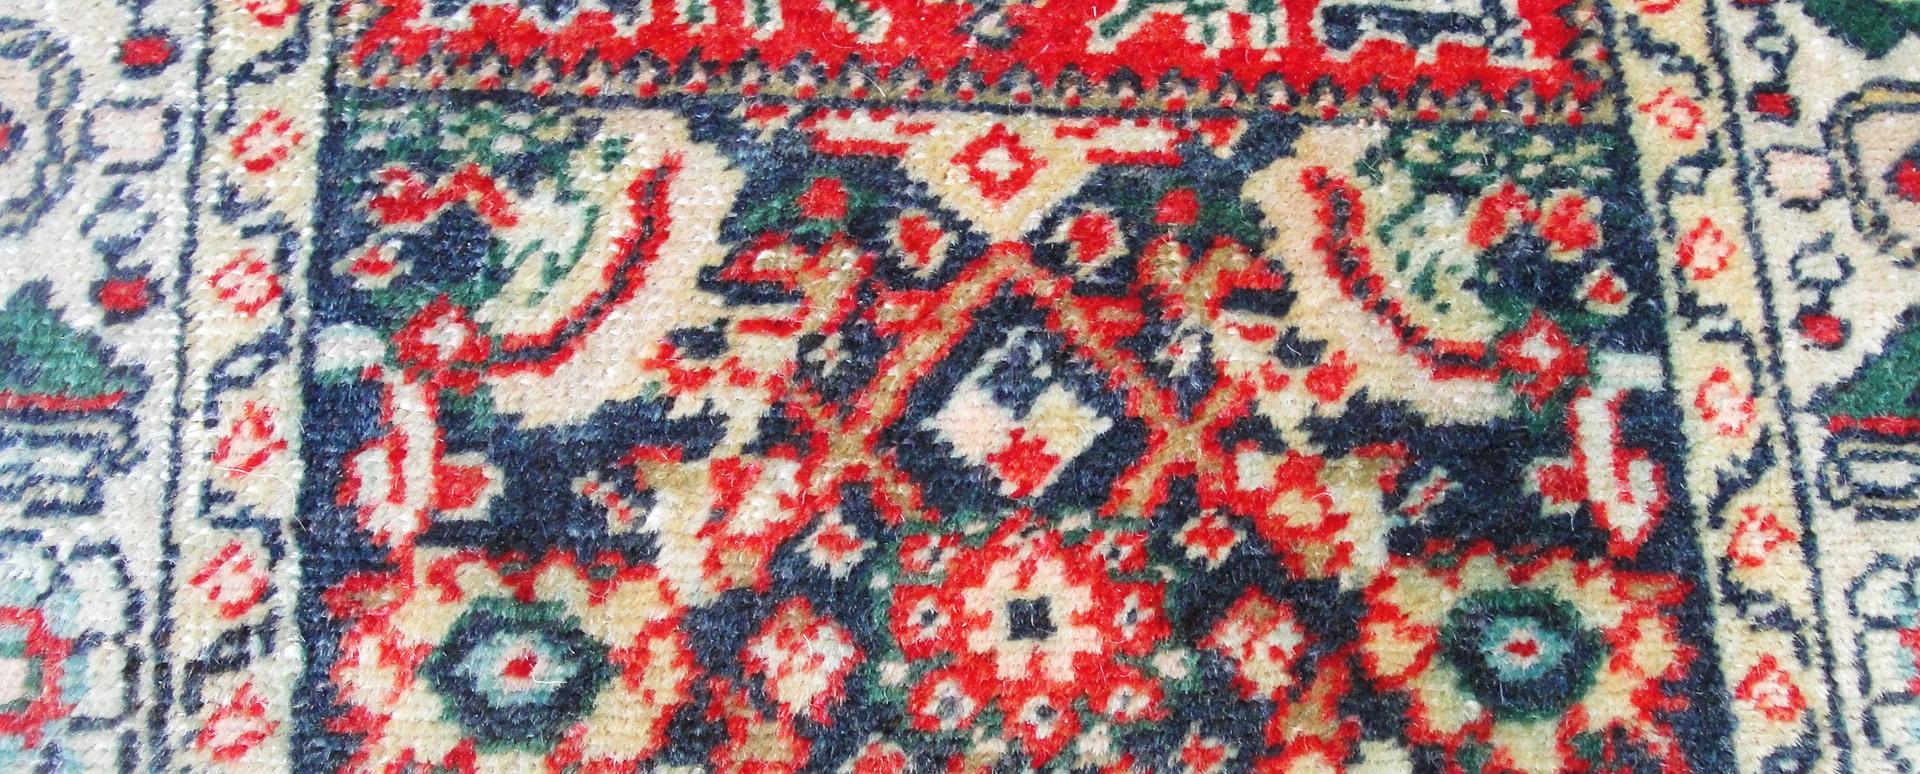 Antique Anatolian Yastik Bag Face Rug, Free Shipping In Good Condition For Sale In Evanston, IL